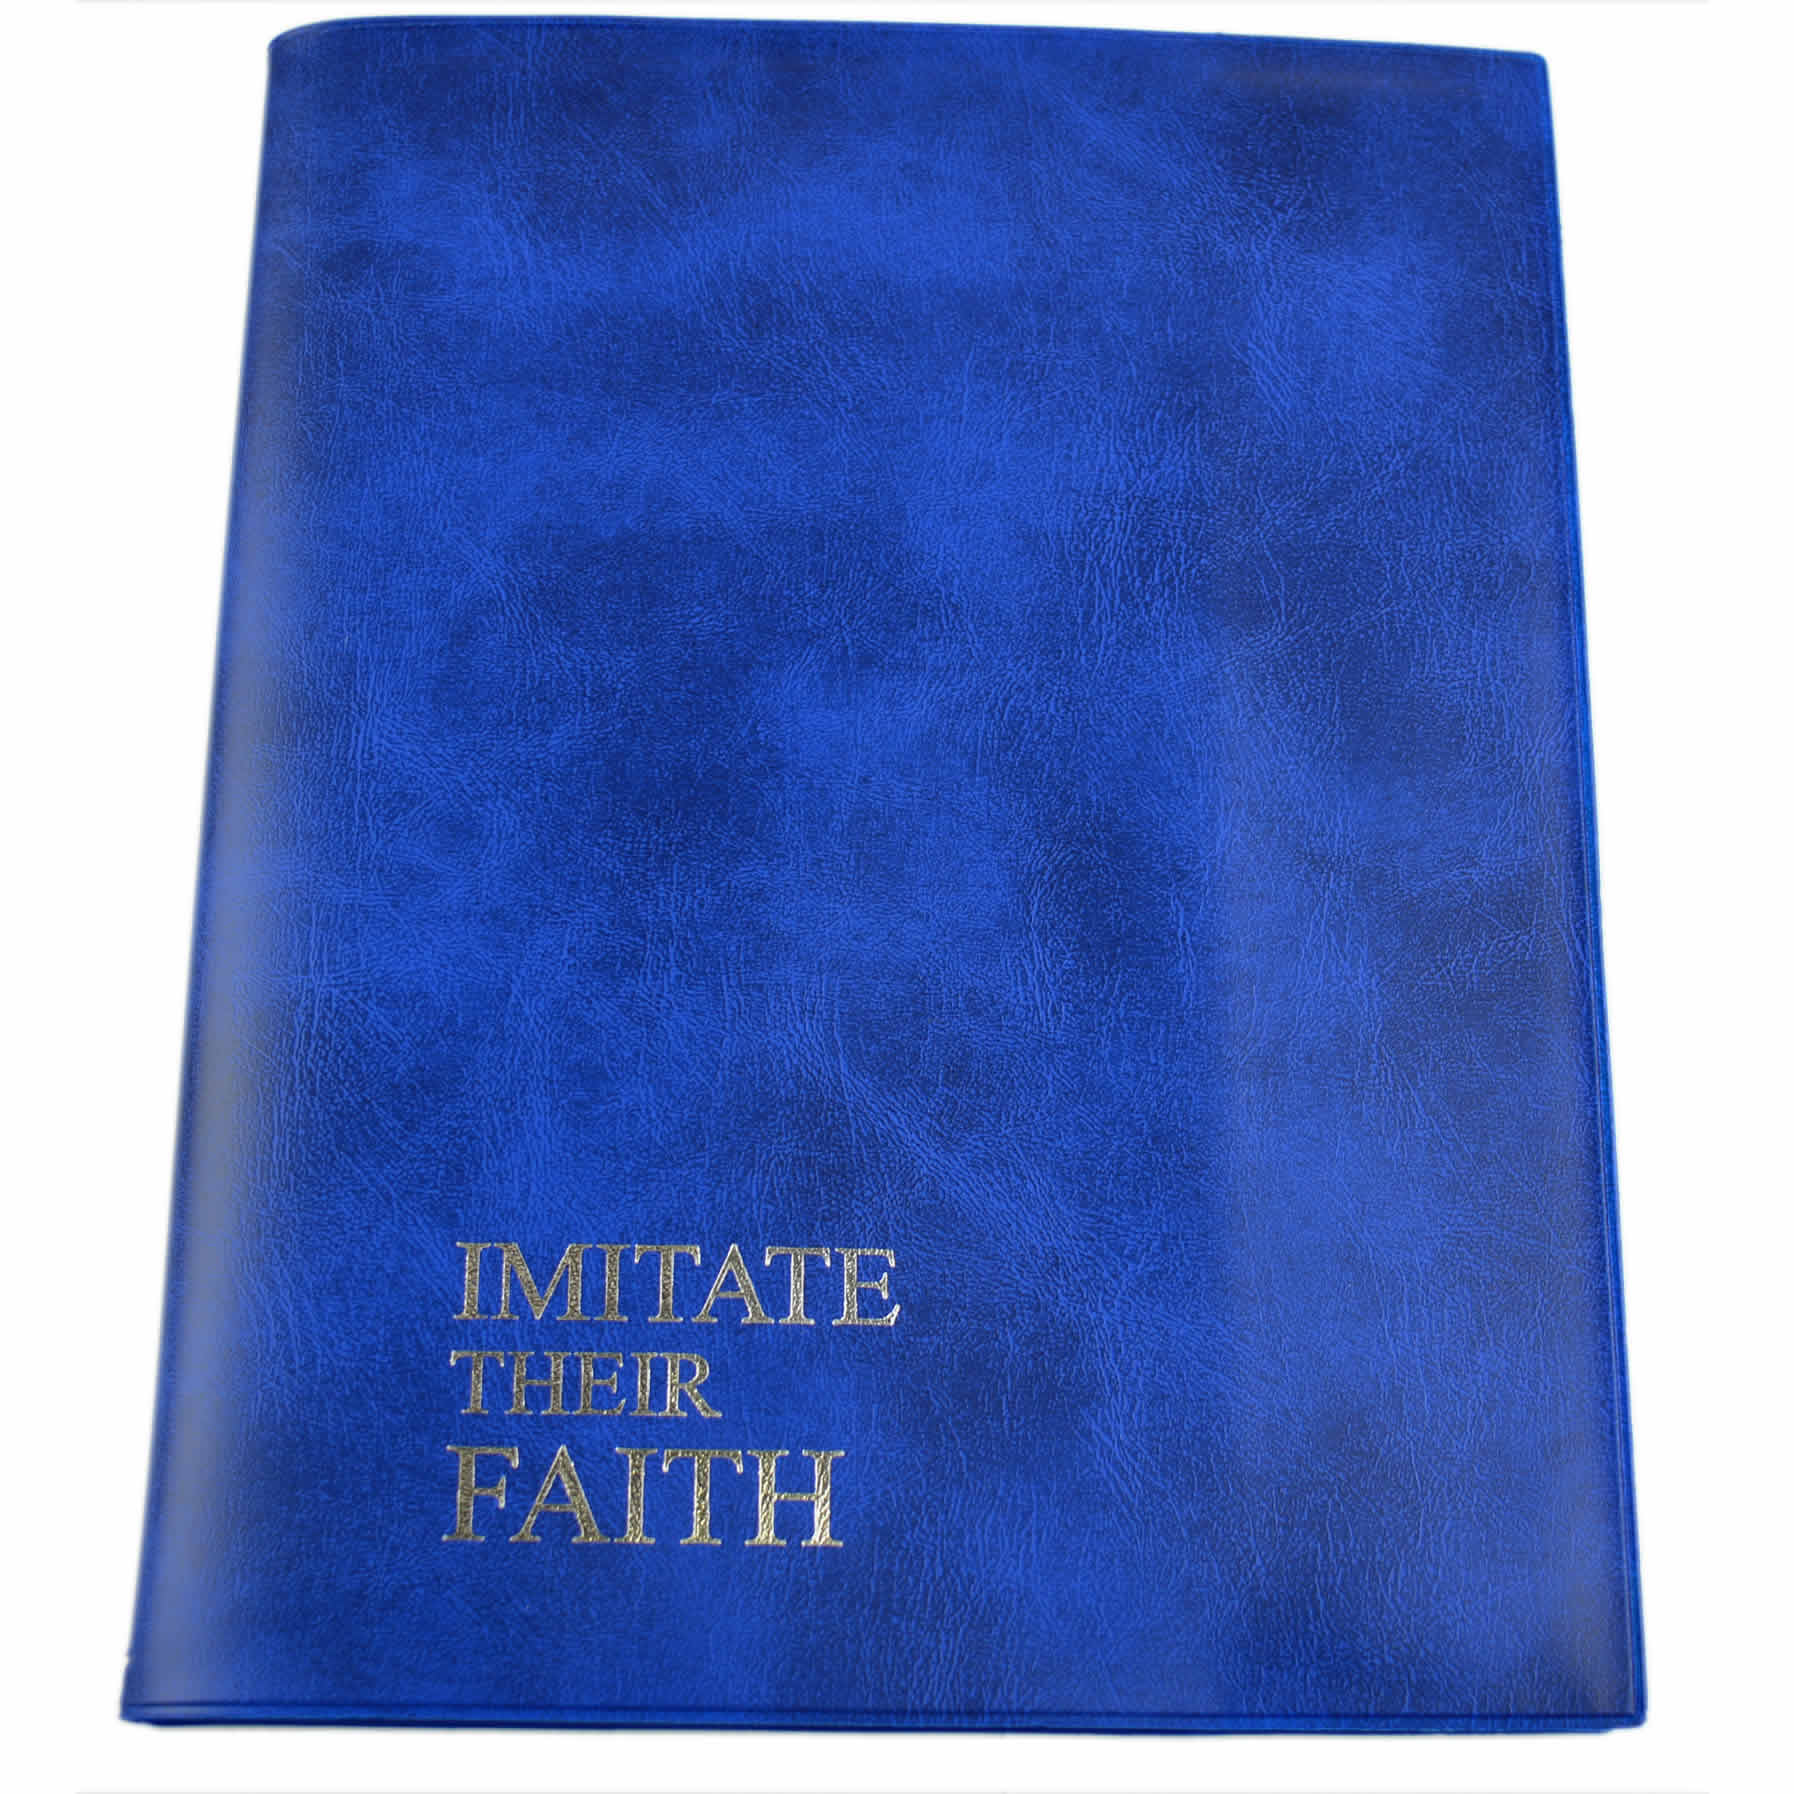 Vinyl Cover for Imitate Their Faith Book - Embossed  - Blue